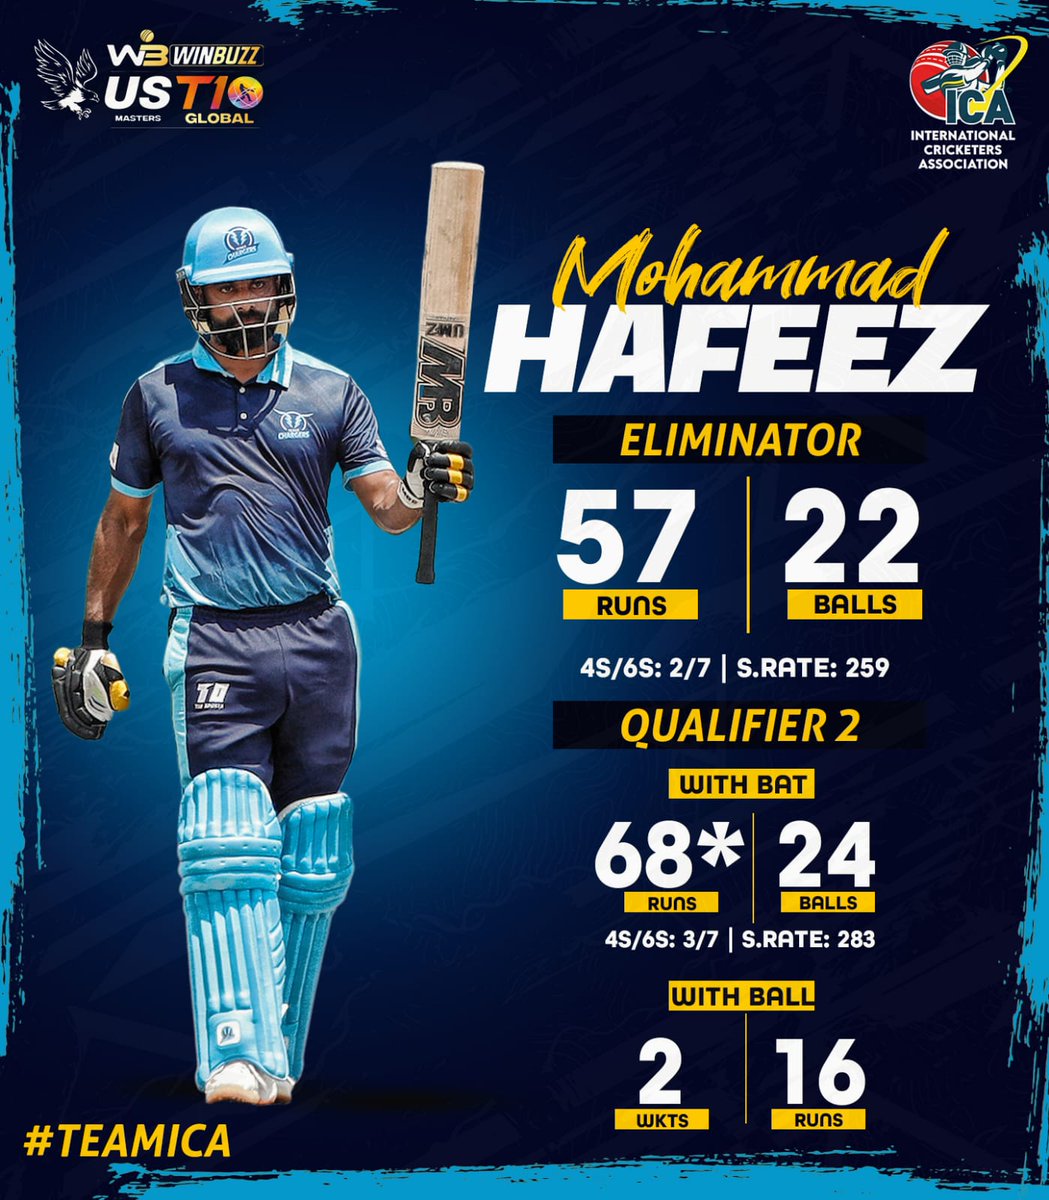 Eliminator ☑
Qualifier 2 ☑

Mohammad Hafeez delivered with a half century in both the games for Texas Chargers 👏

#TeamICA #TexasChargers #USACricket #USMastersT10